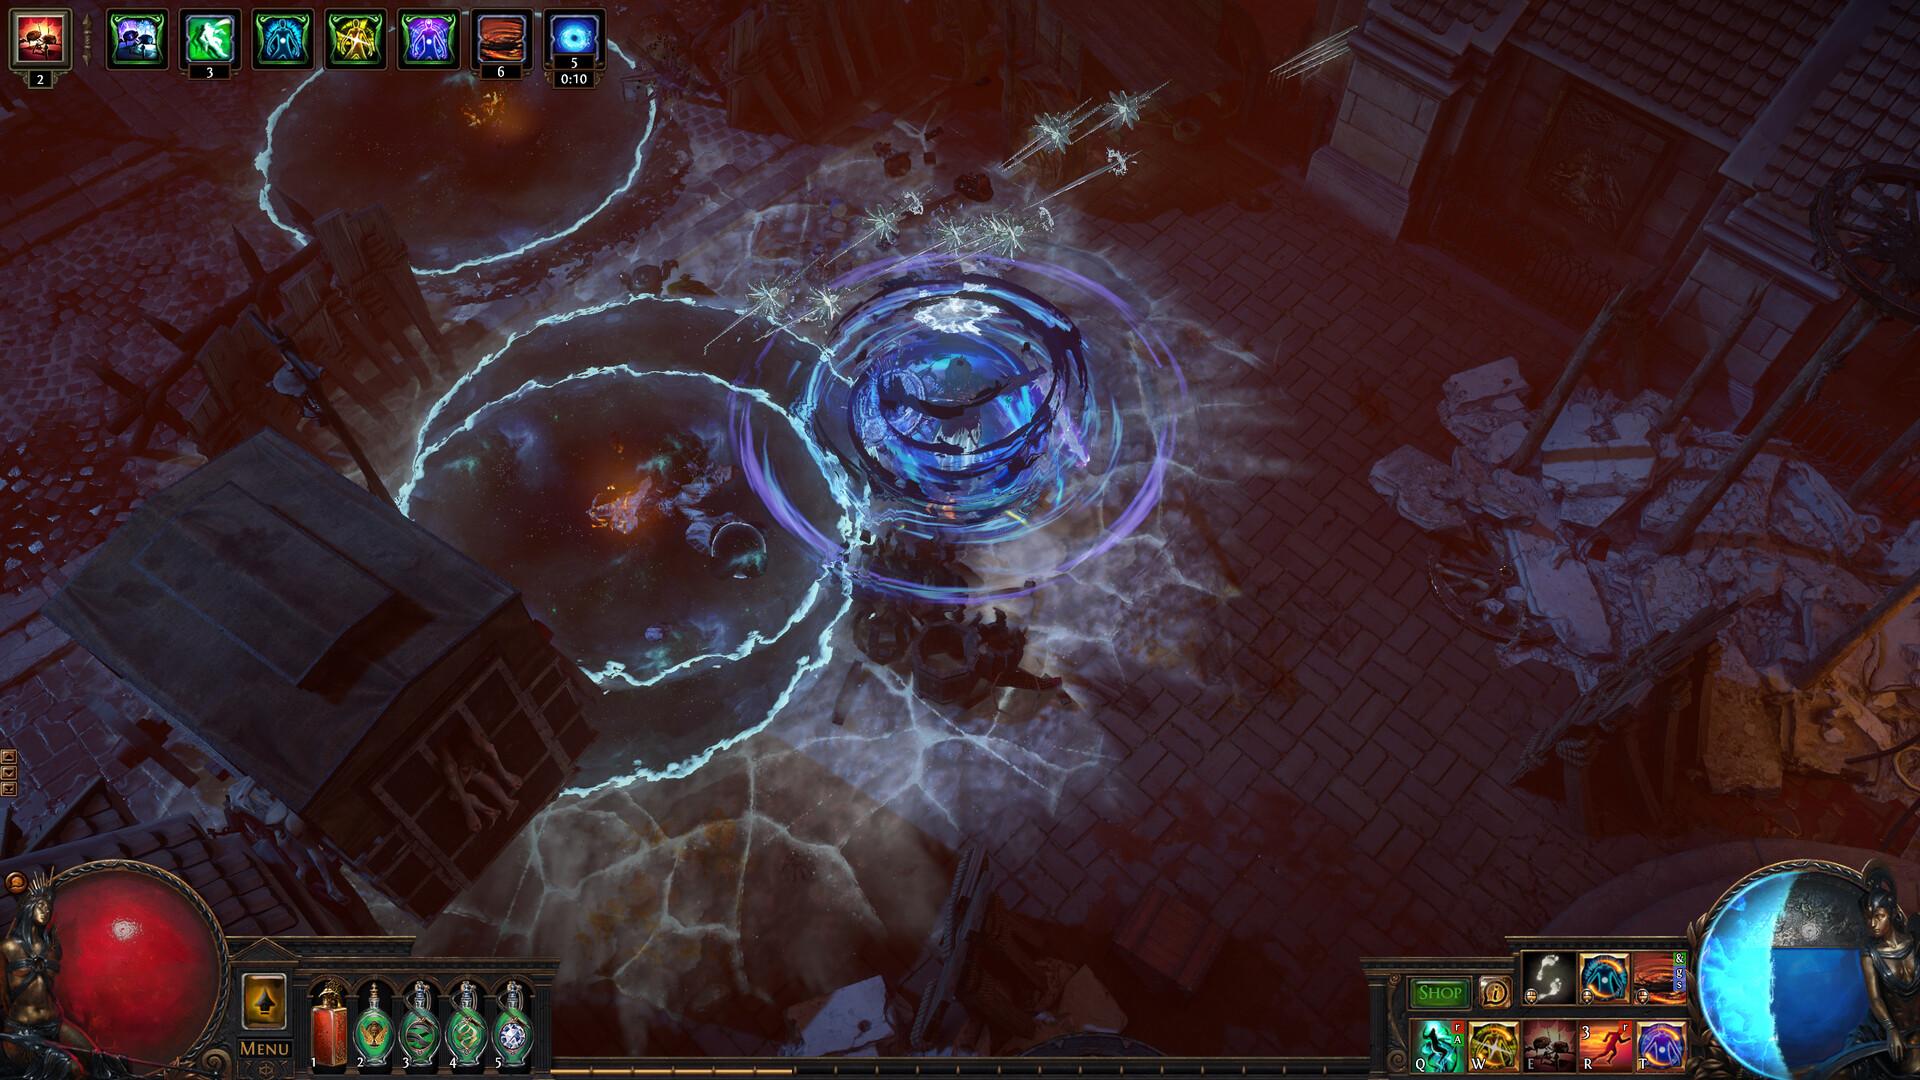 Screenshot №3 from game Path of Exile